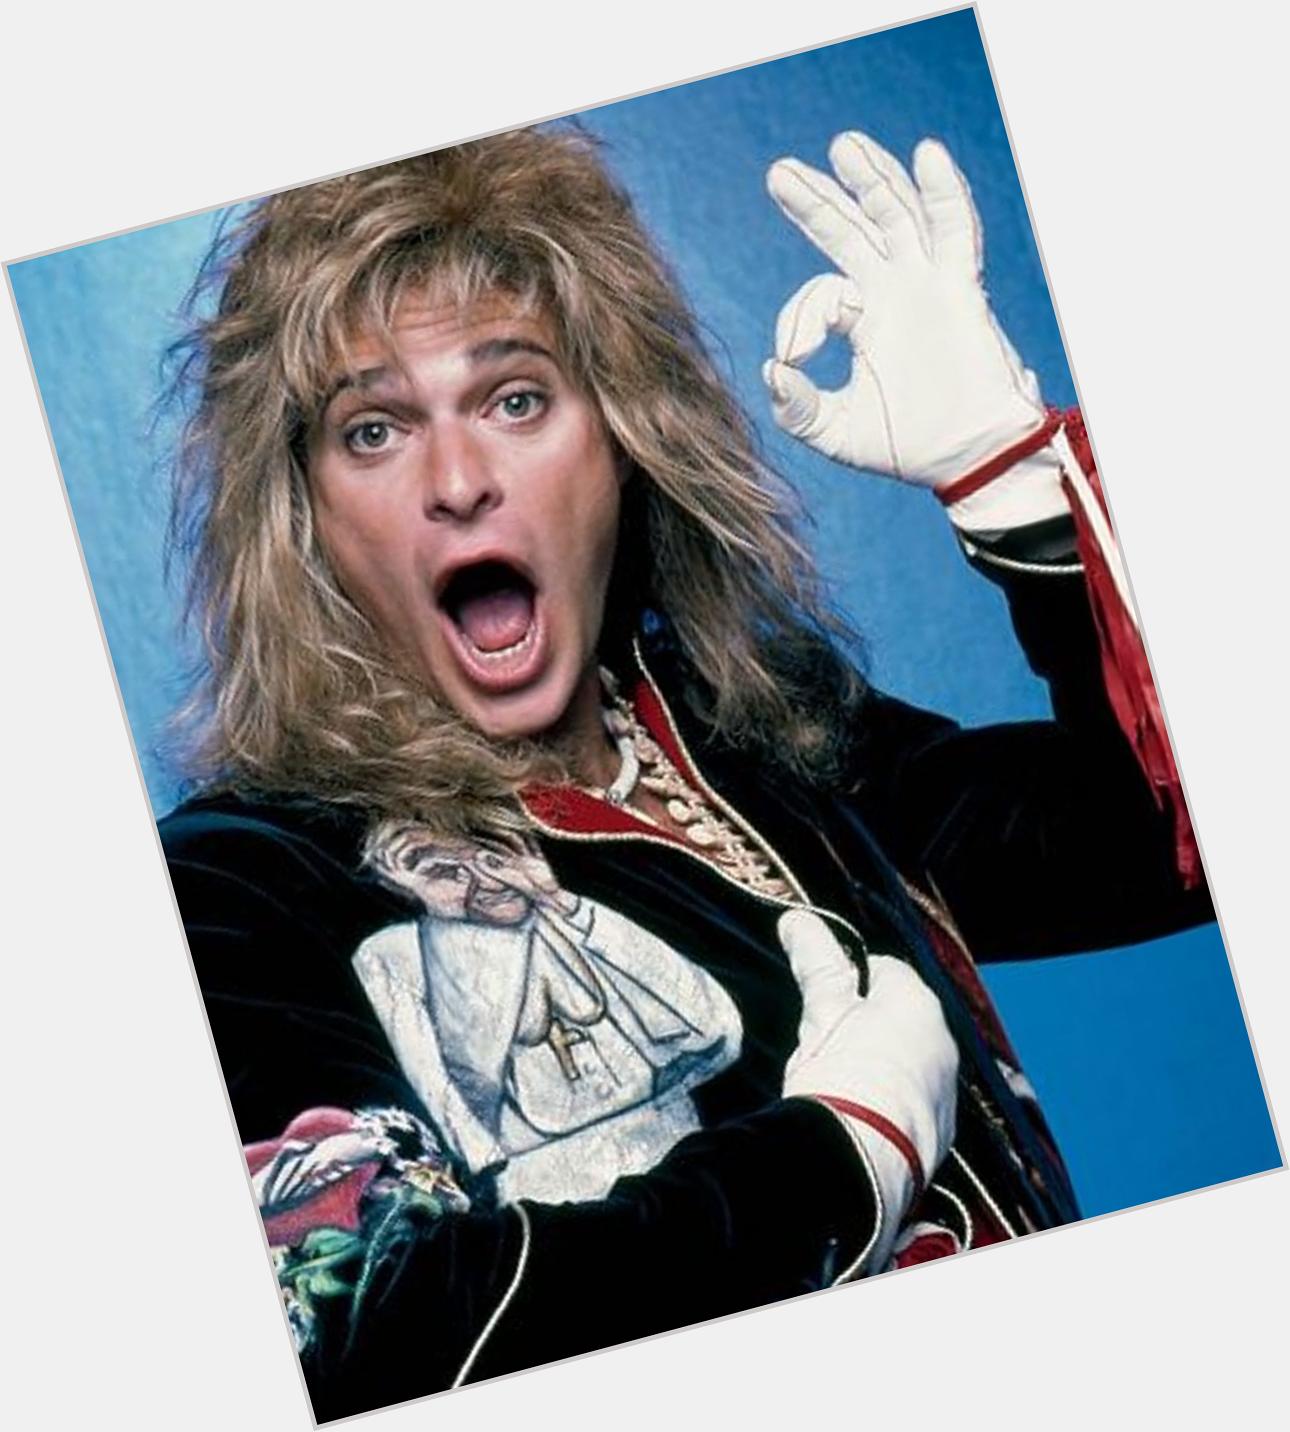 Happy Birthday to David Lee Roth who turns 63 today! 